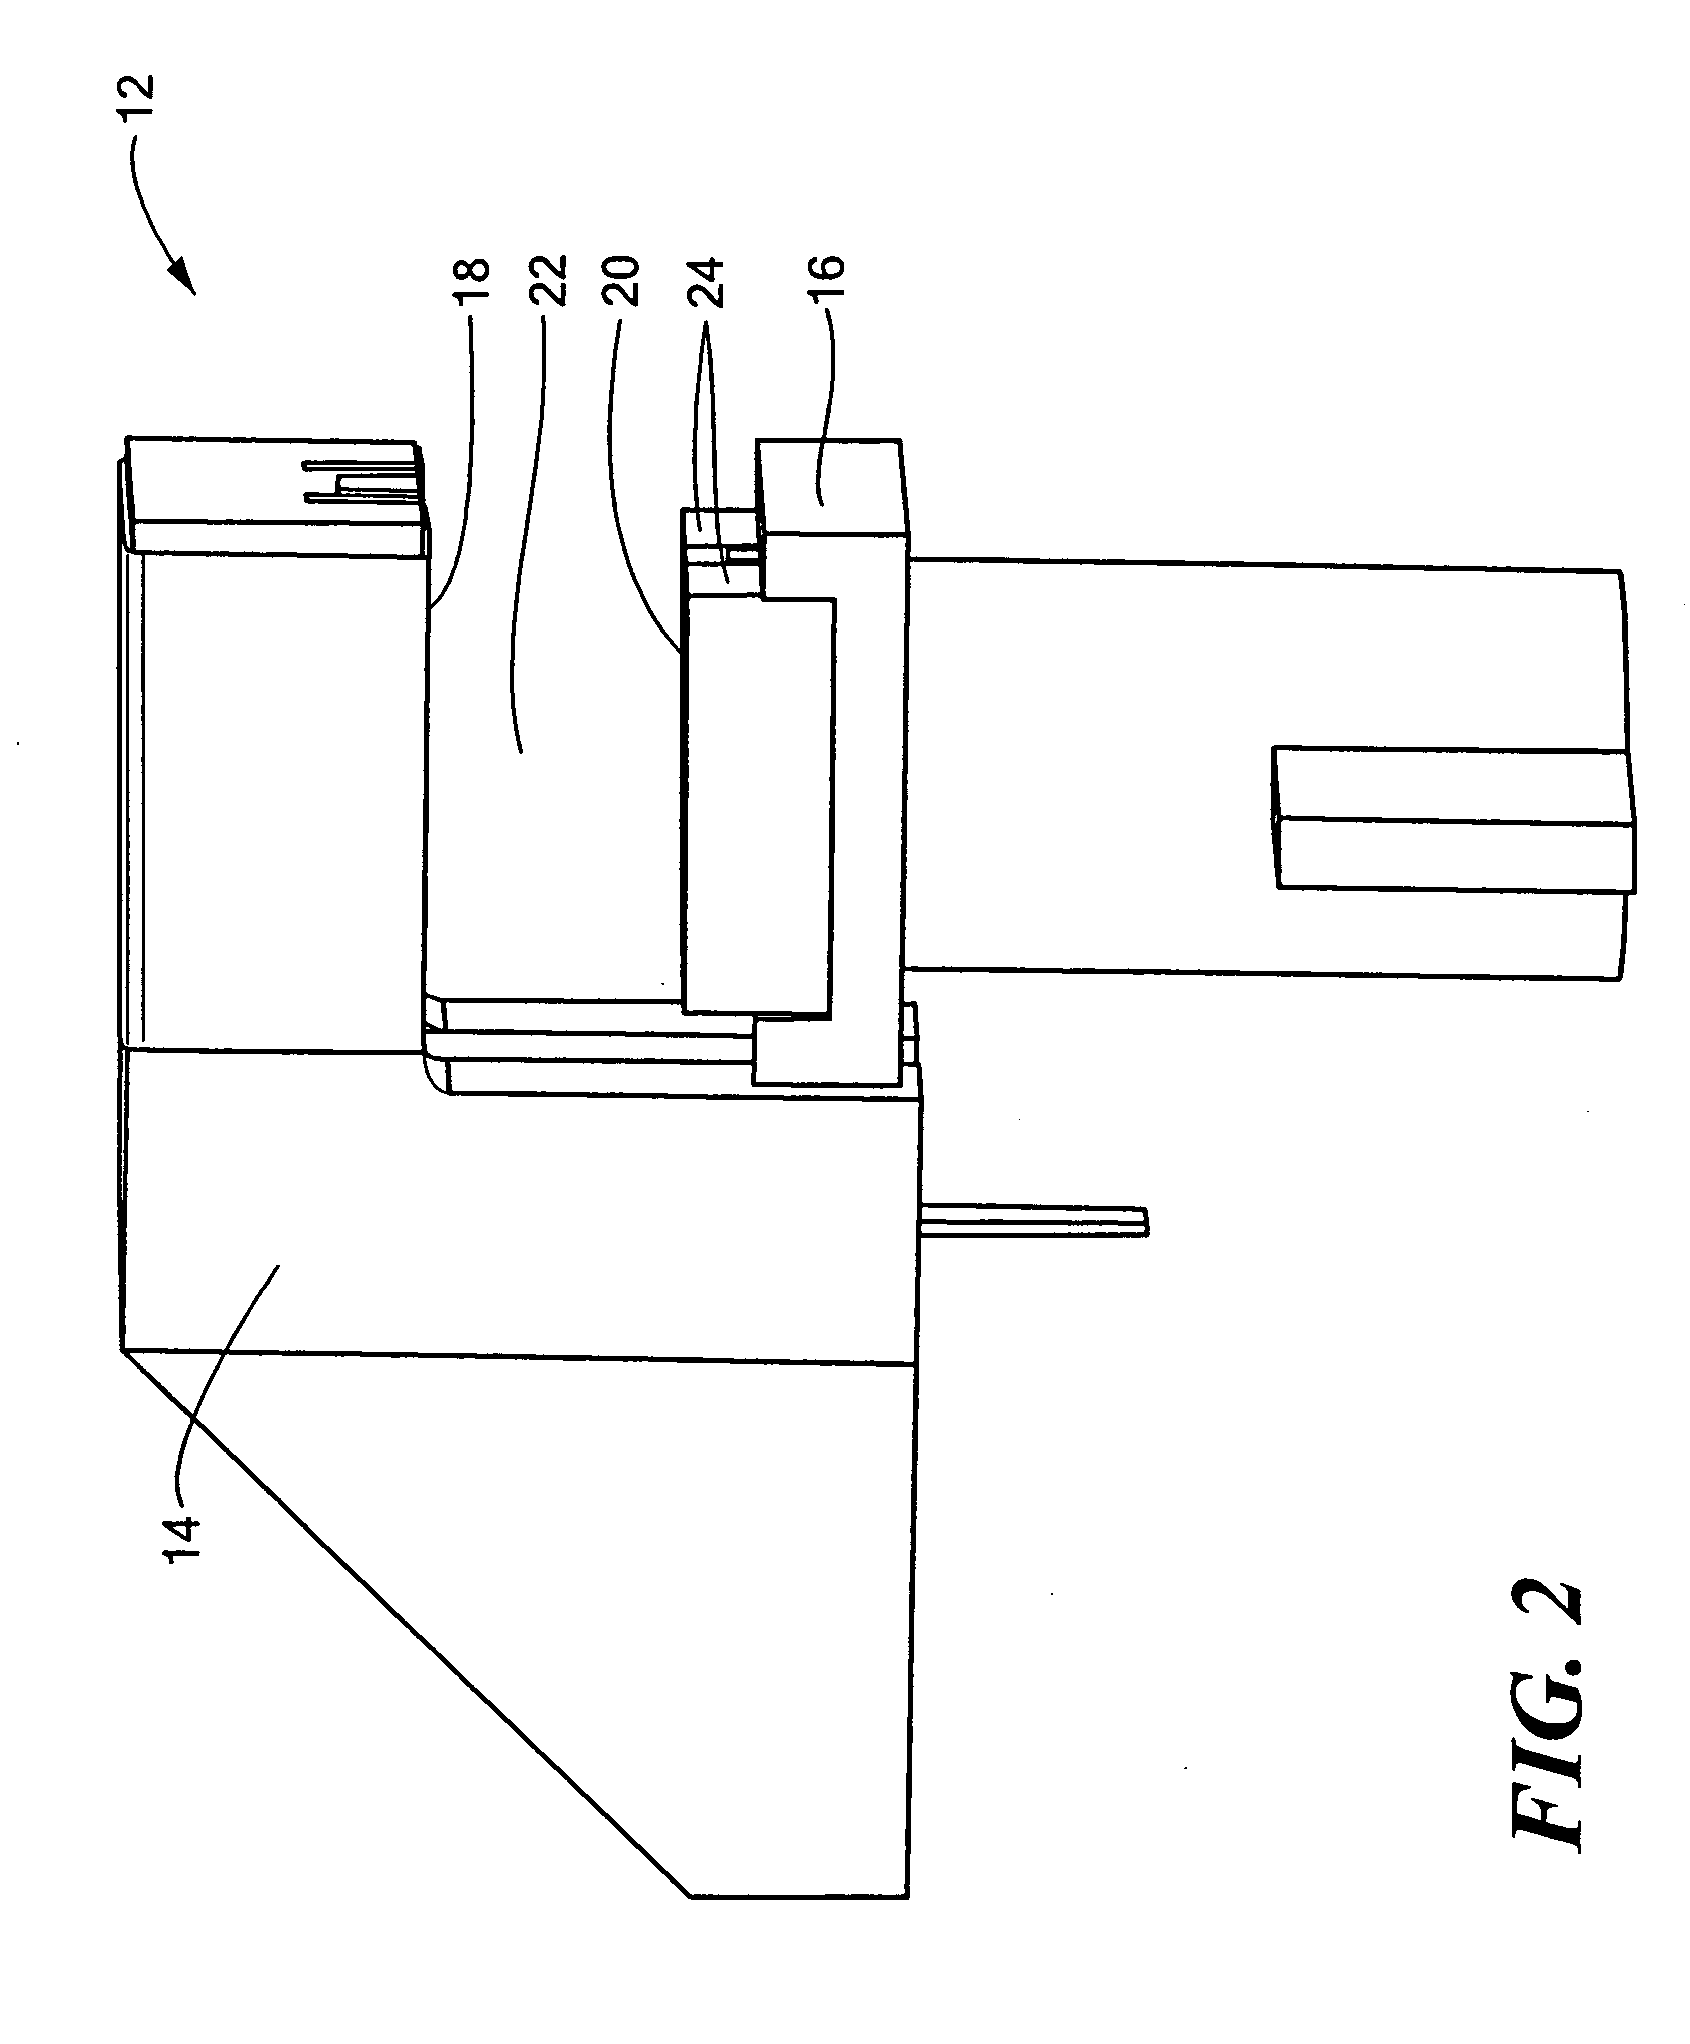 Gas removal in an intravenous fluid delivery system